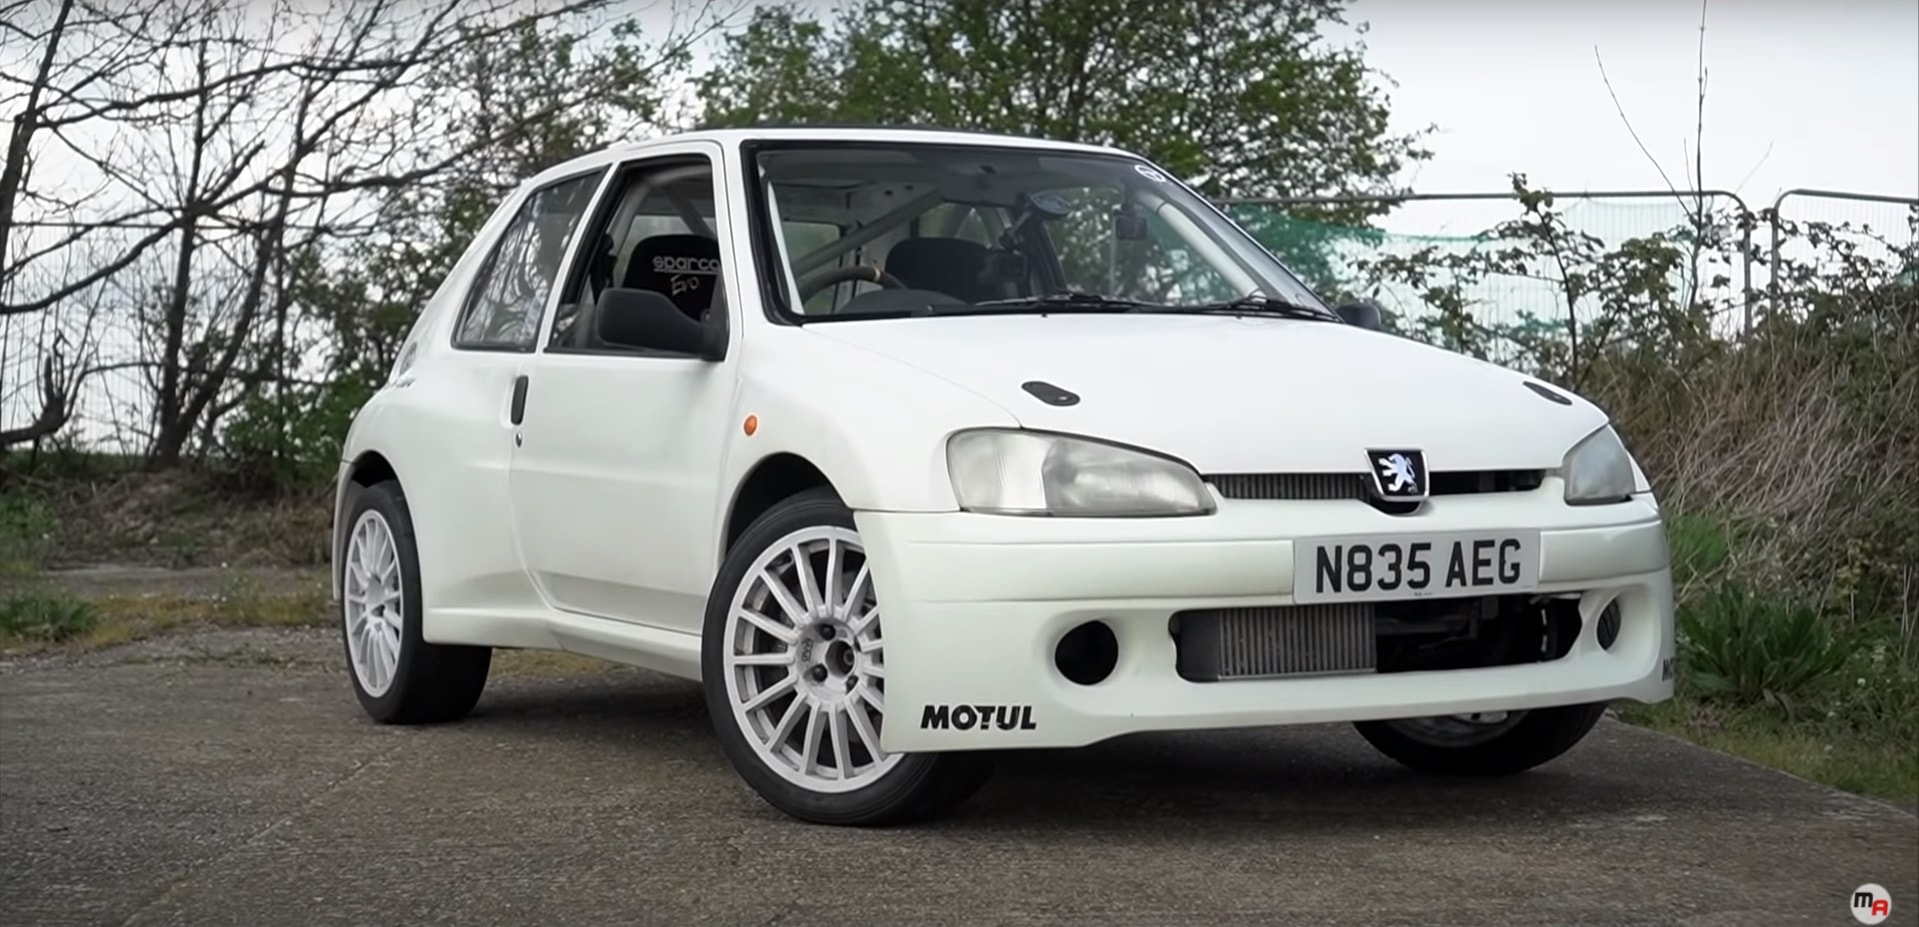 Peugeot 106 Turbo Custom Build Has +400HP and AWD, Is the True 205